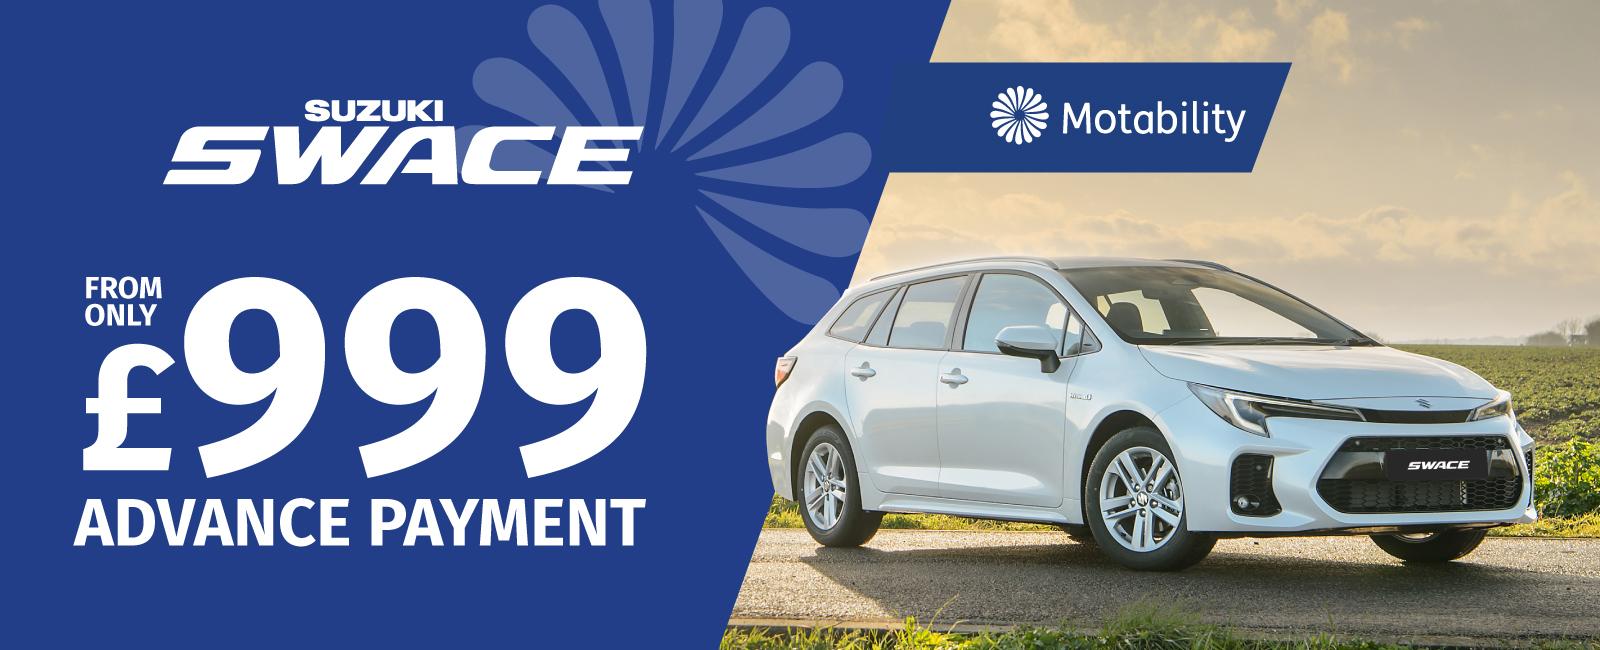 The Suzuki Swace on the Motability Scheme from £999 Advance Payment